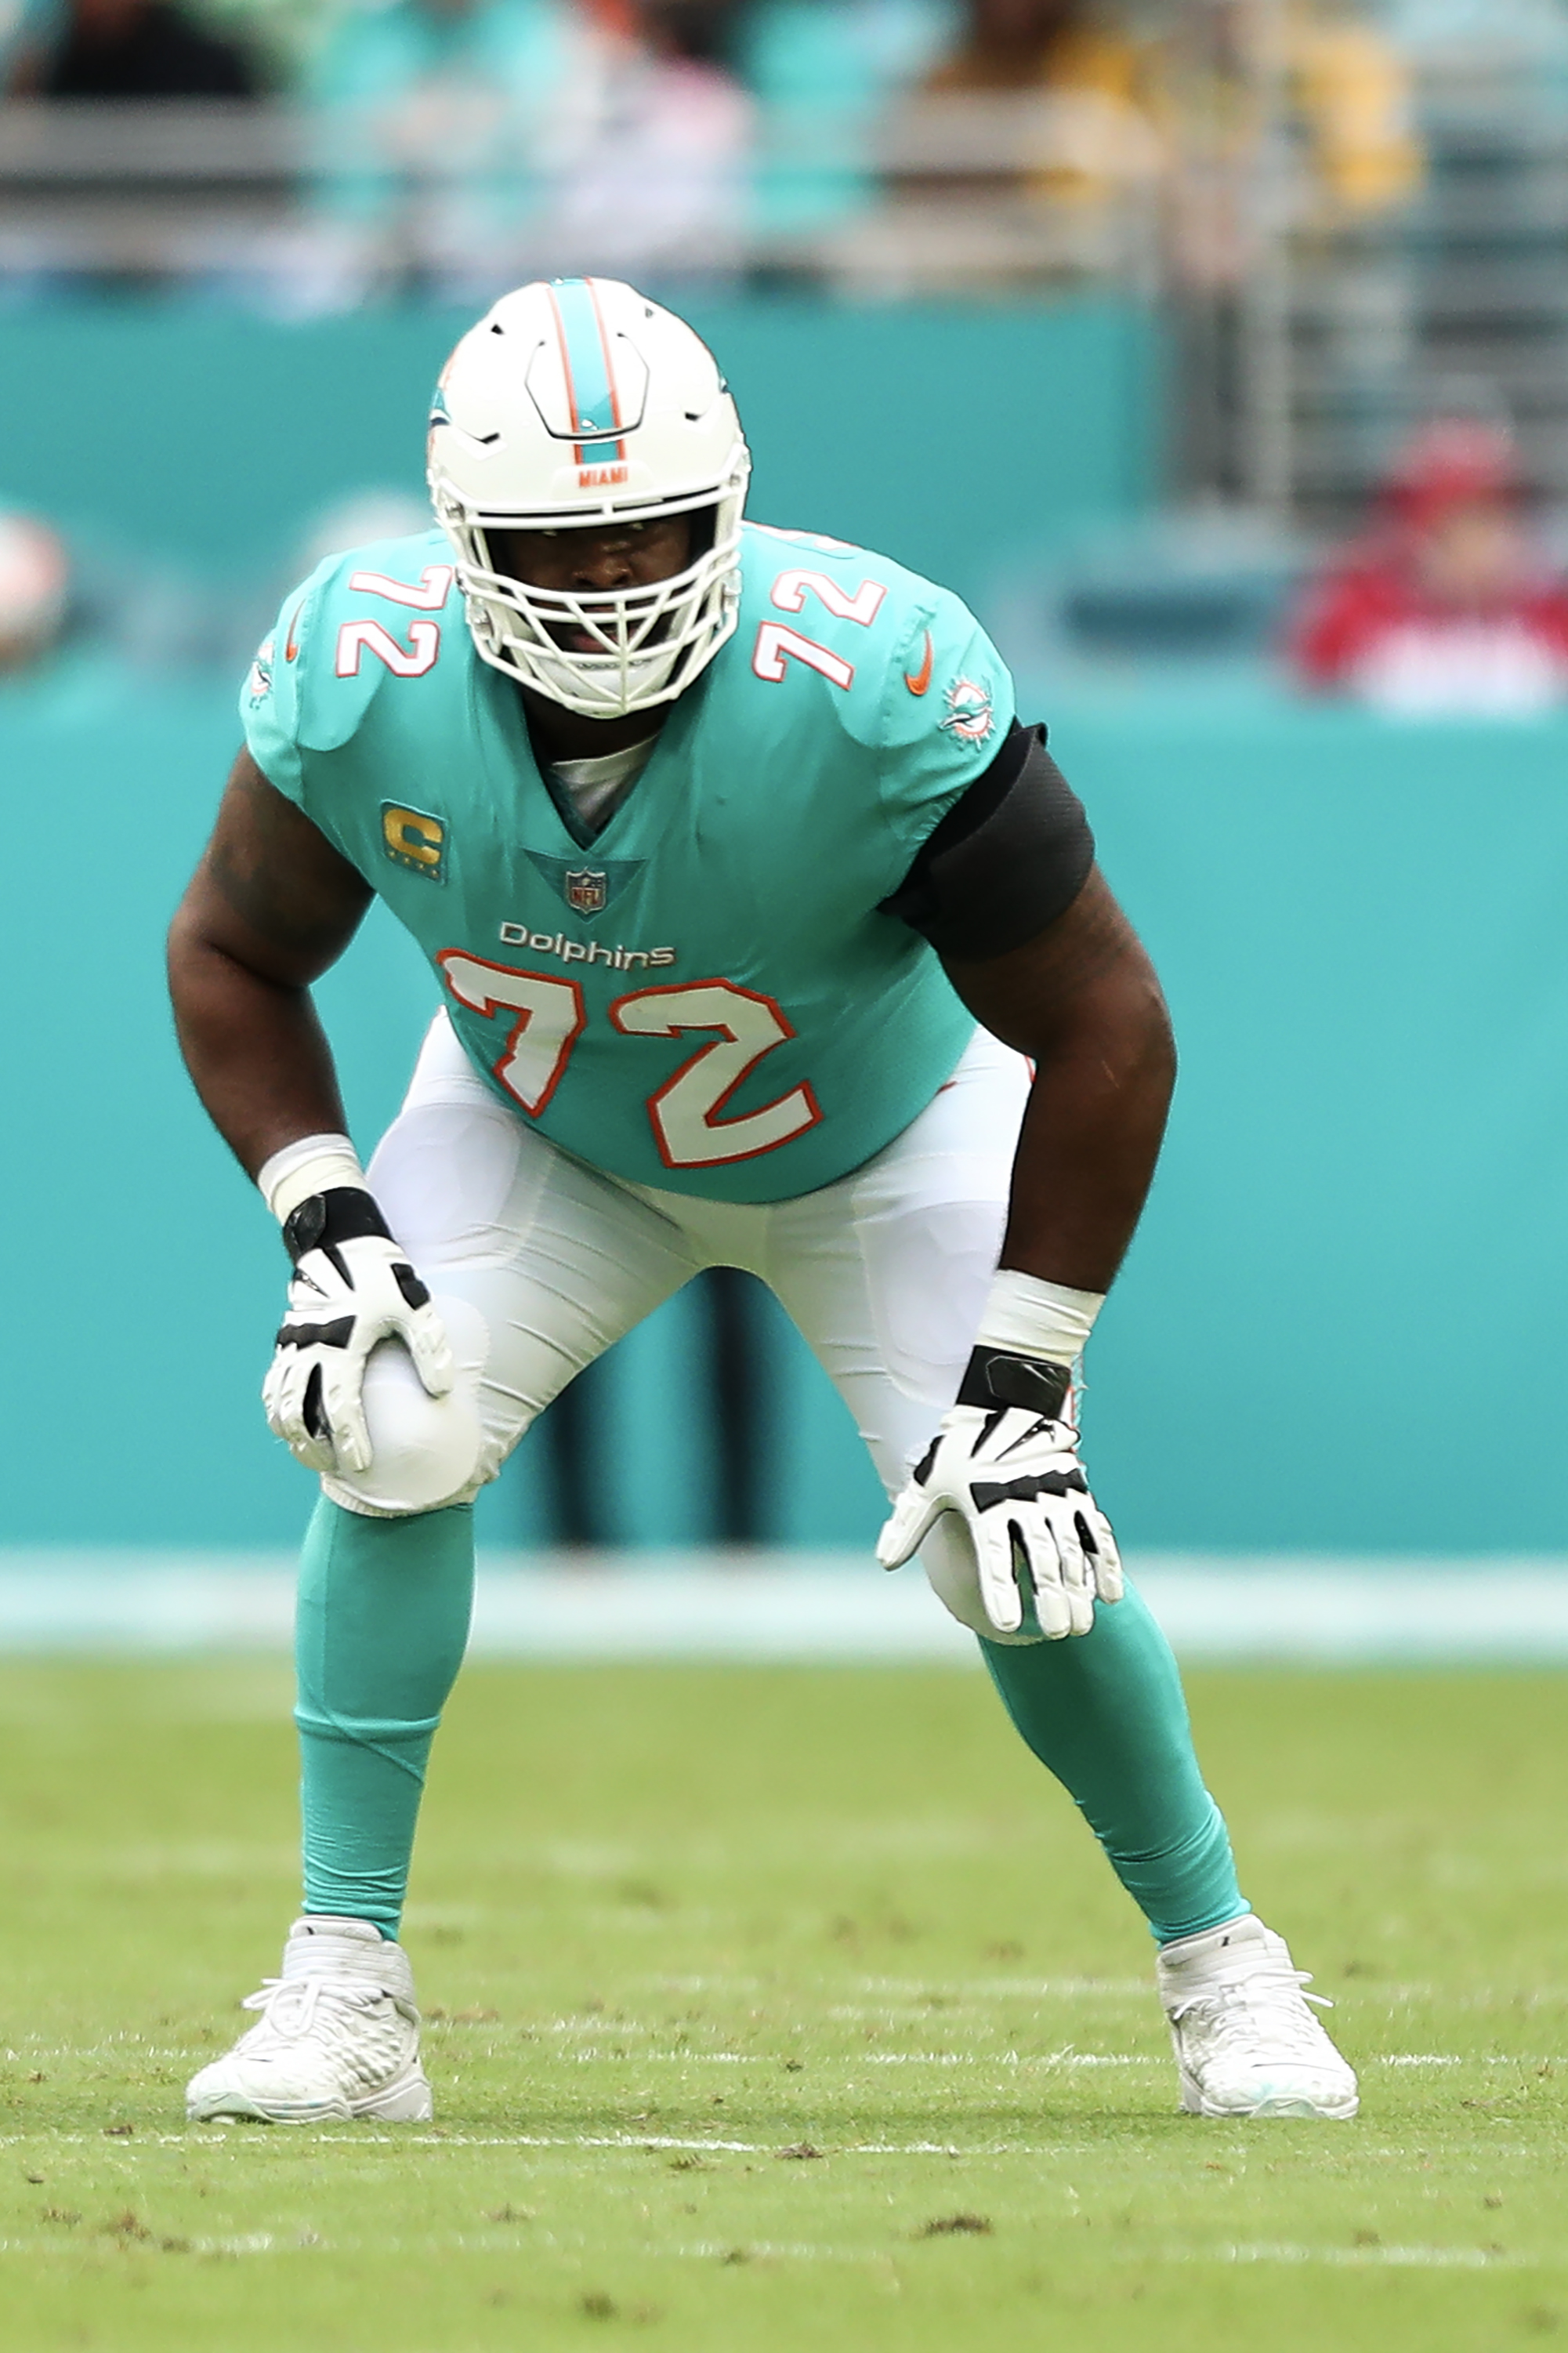 Dolphins to wear all aqua on Thursday night - The Phinsider